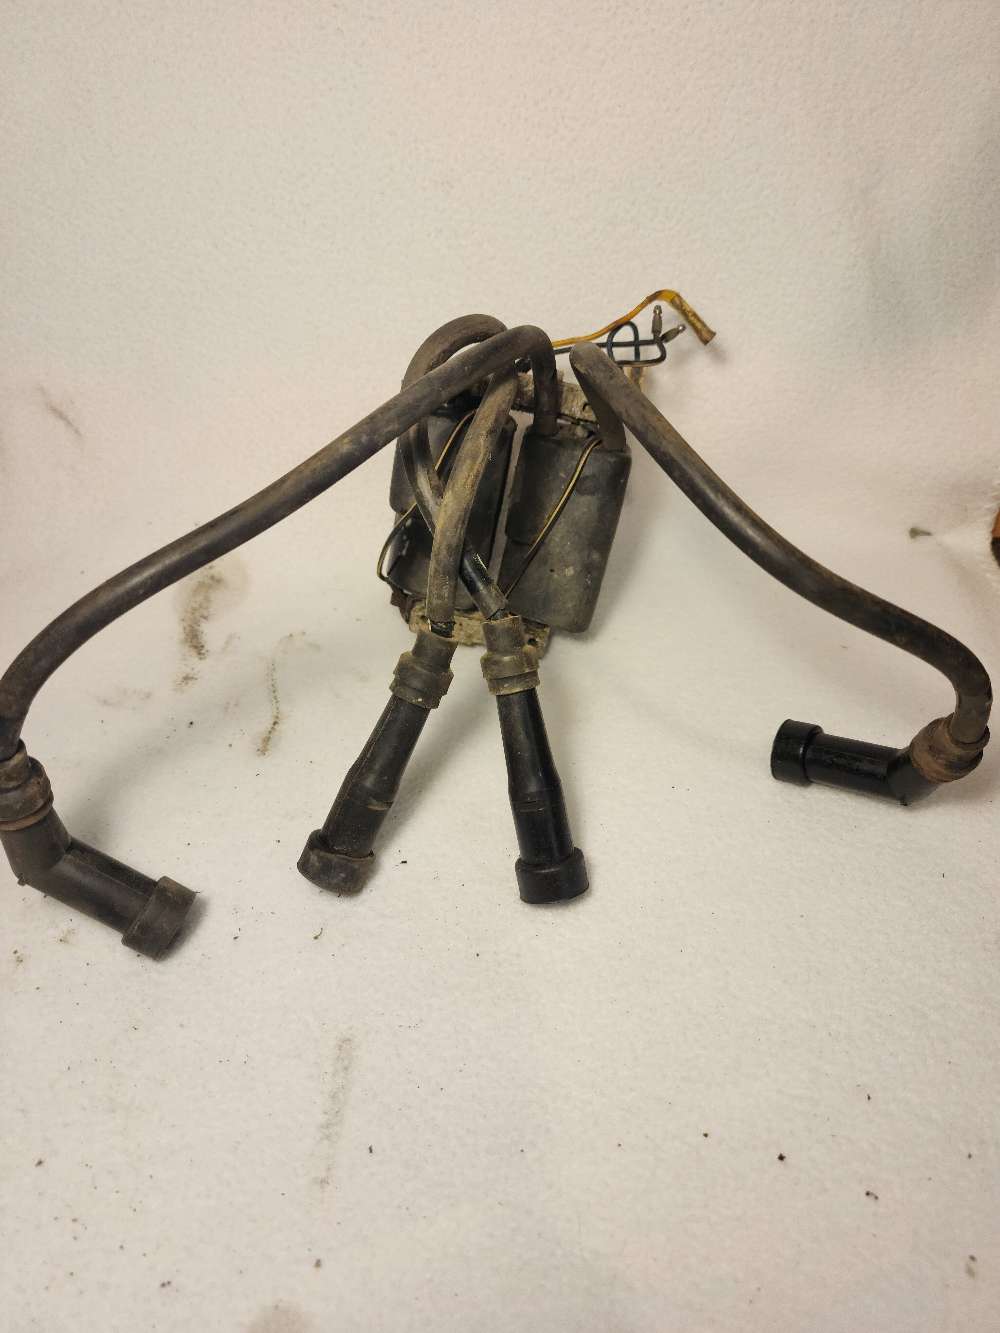 COIL ASSY IGNITION 30500-300-013 1972 Honda CB750 Used